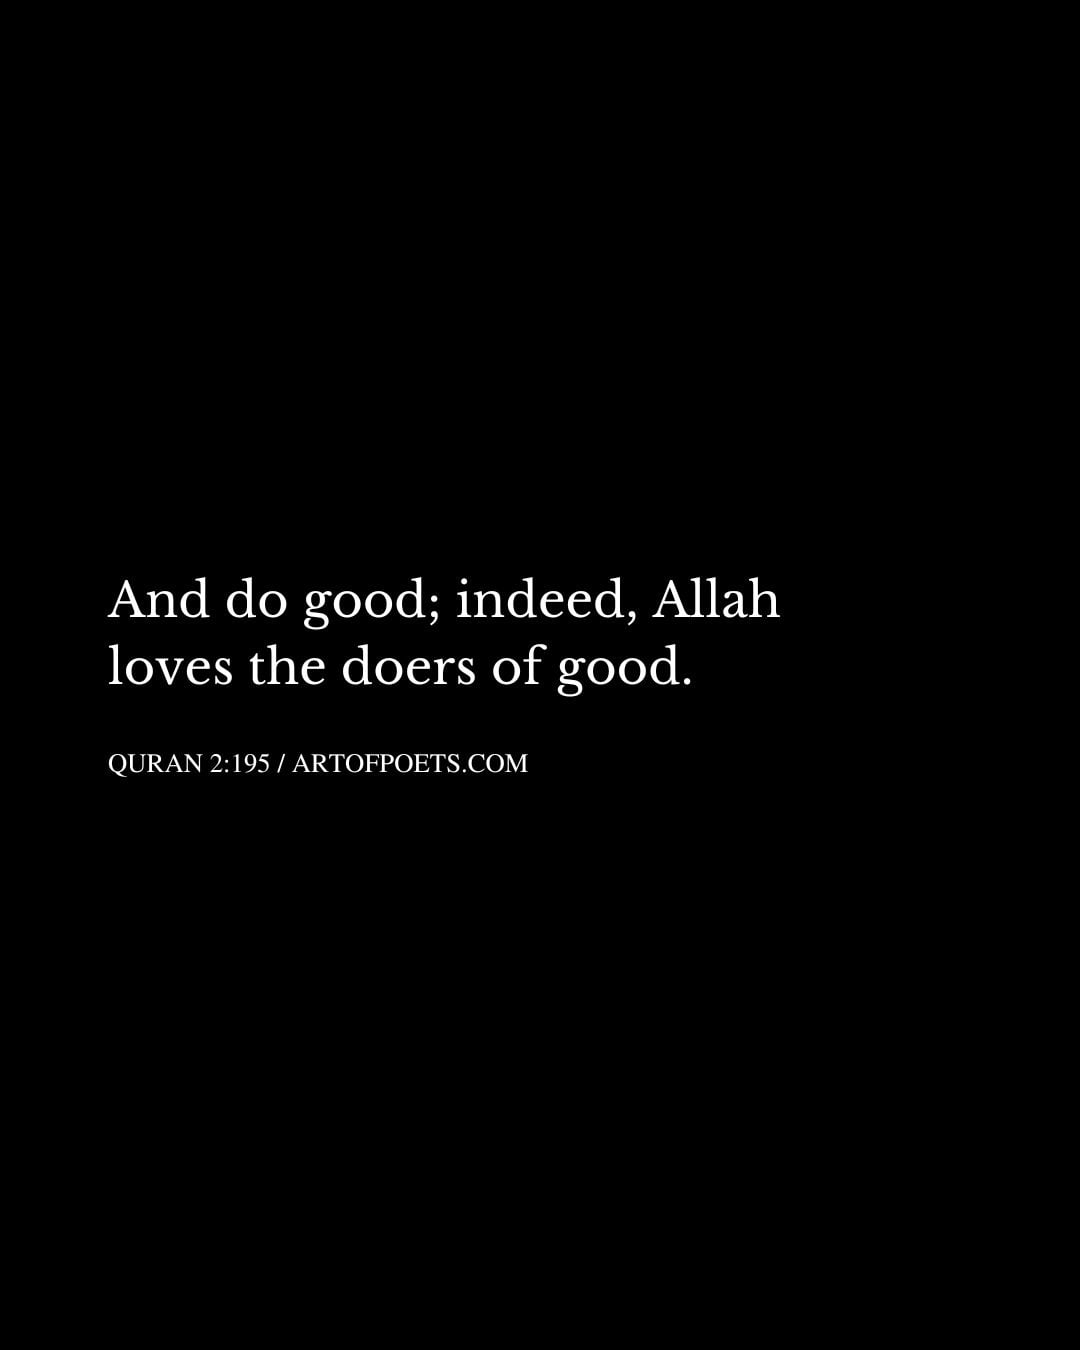 And do good indeed Allah loves the doers of good